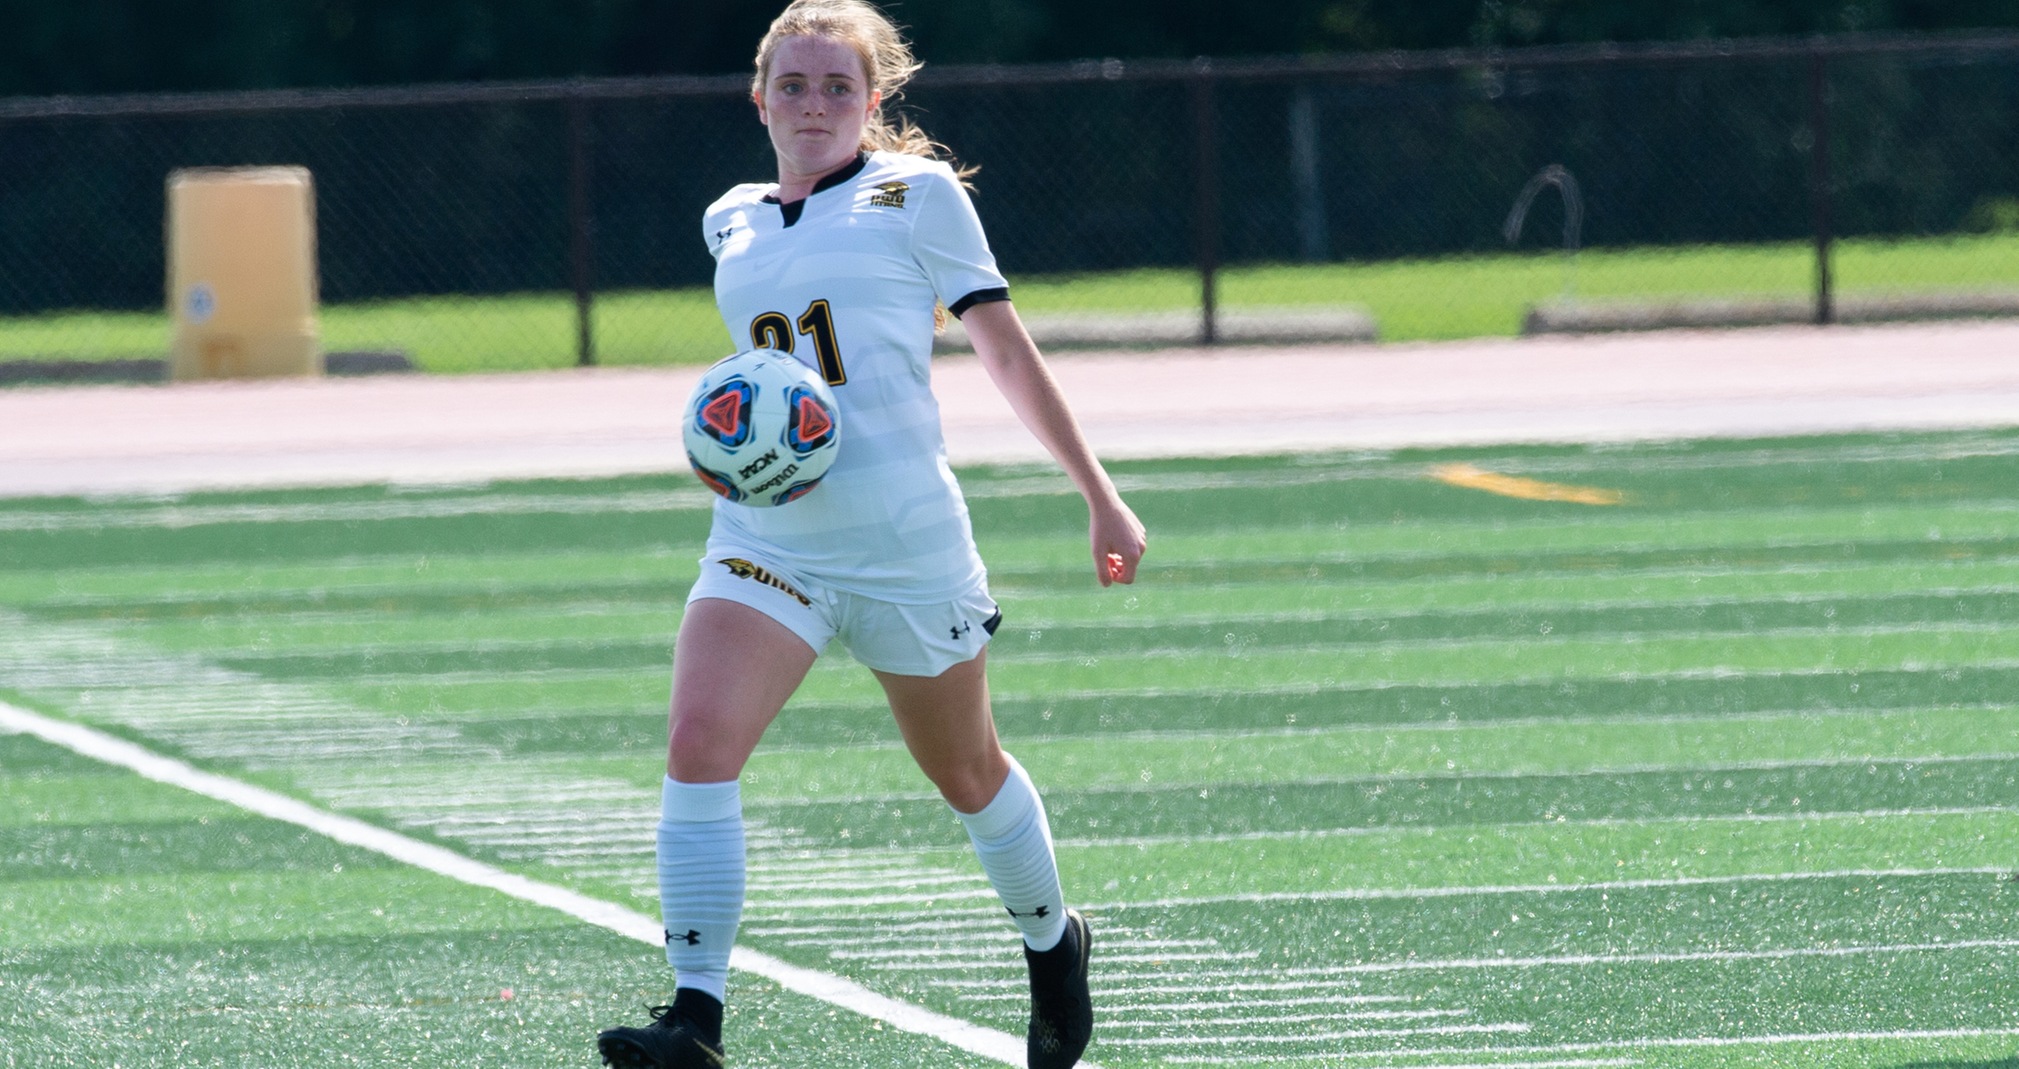 Emily Richter helped control the midfield area and limit the Blugolds to just one goal.